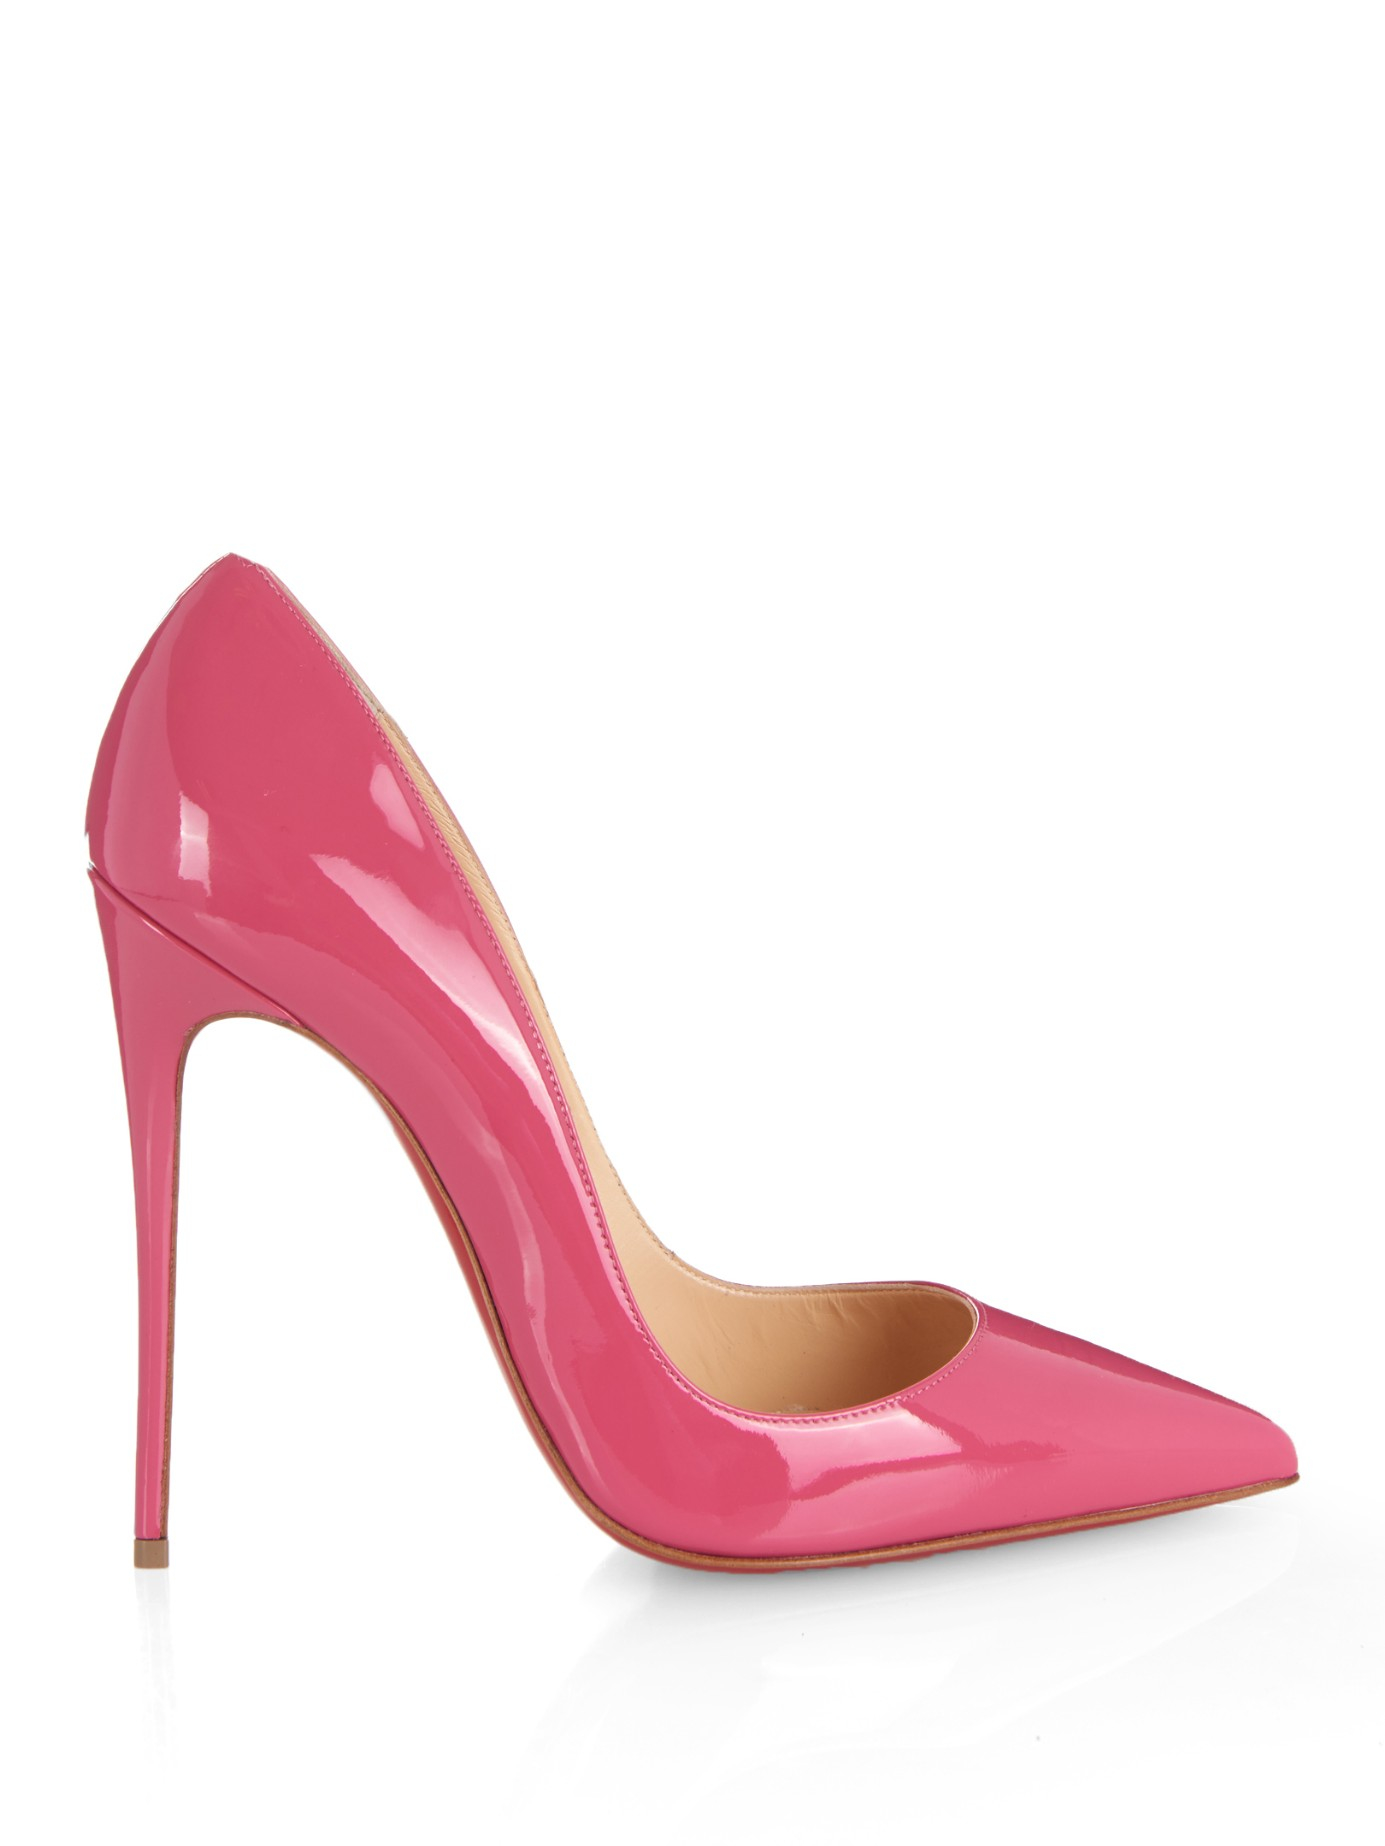 Christian louboutin So Kate Patent in Pink | Lyst